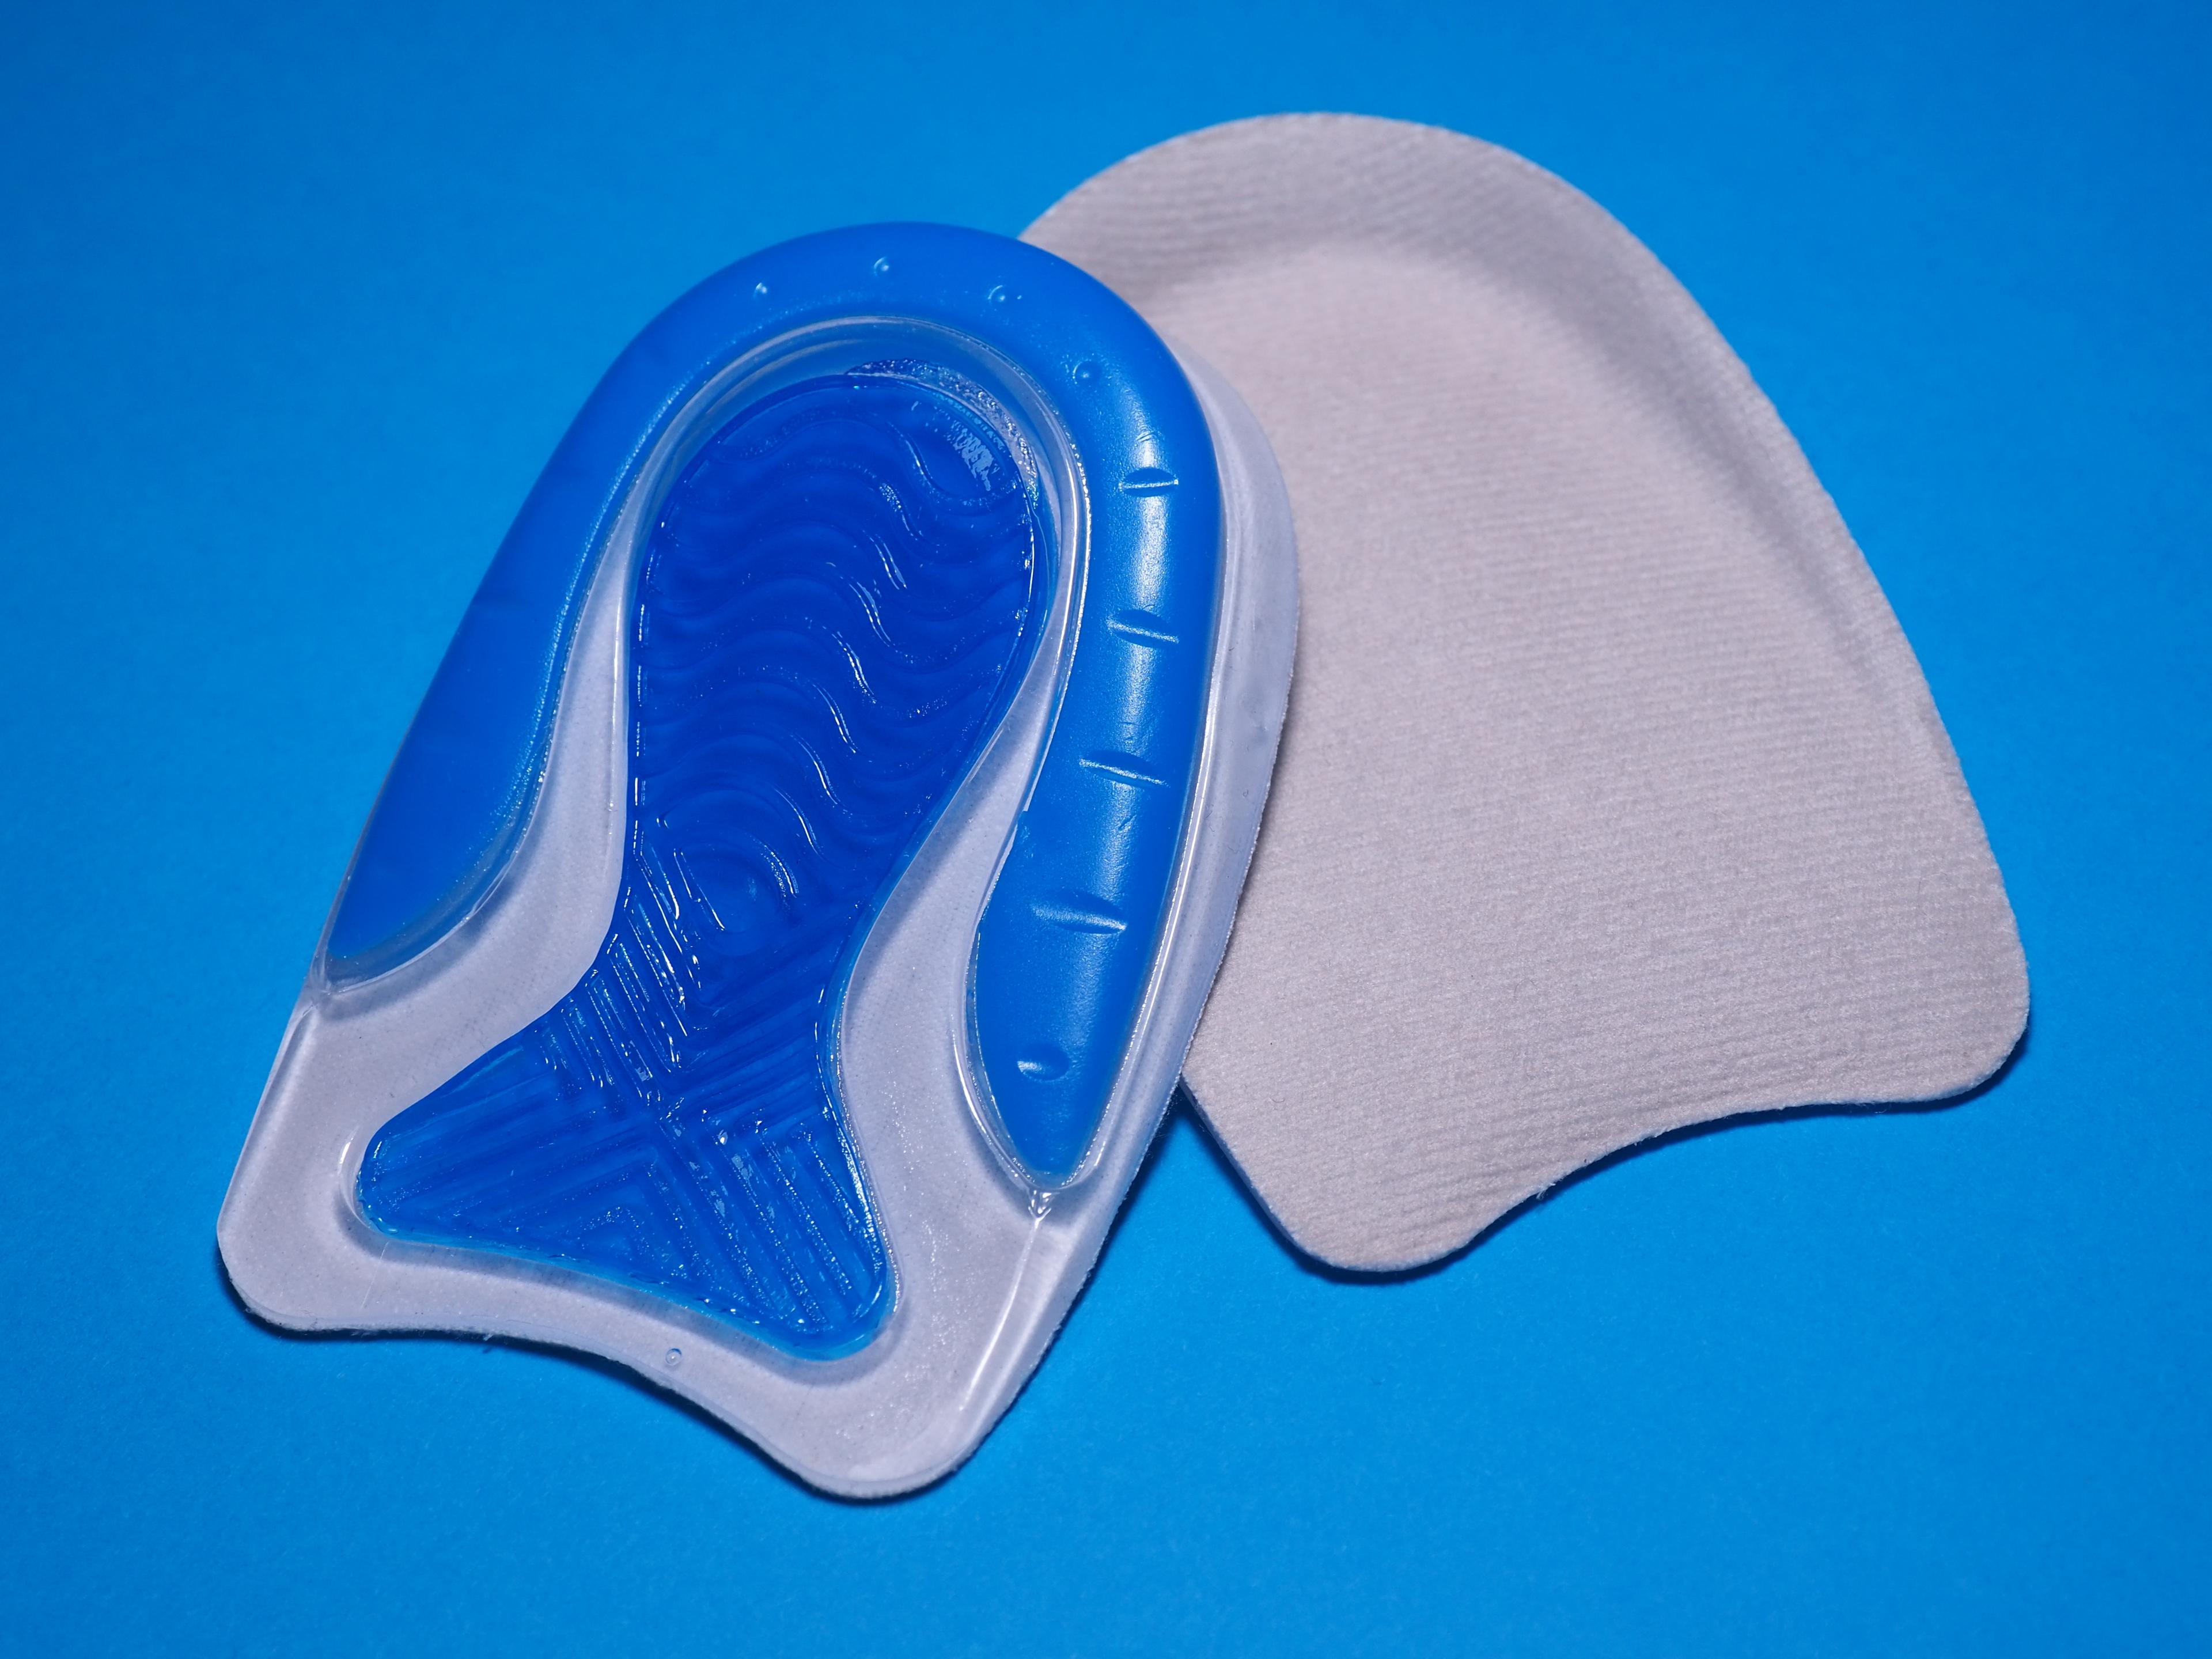 Heel-lifting shoe inserts may further reduce your Achilles pain.